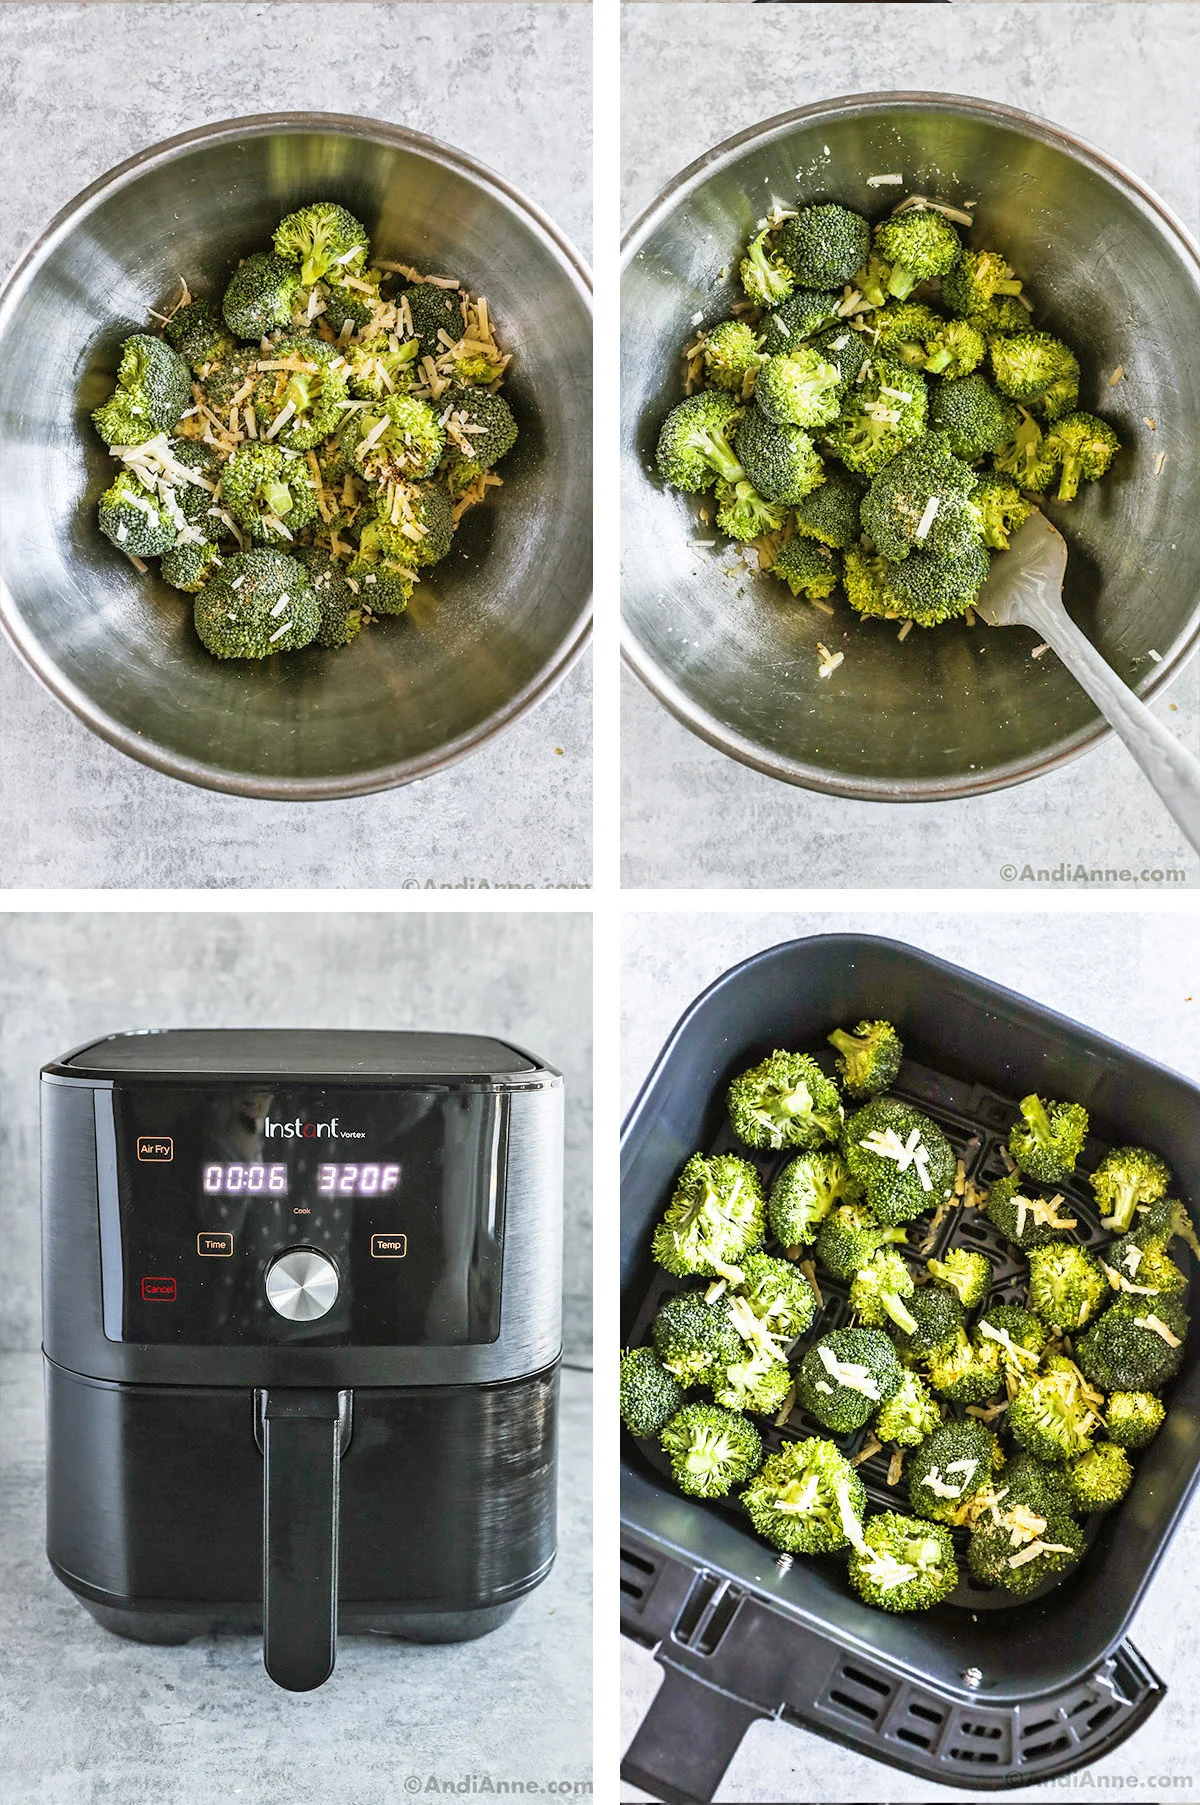 Four images, first two of broccoli florets mixed with parmesan cheese and spices in a metal bowl with spatula. Second two of air fryer and air fryer basket with broccoli florets tossed with parmesan and spices.